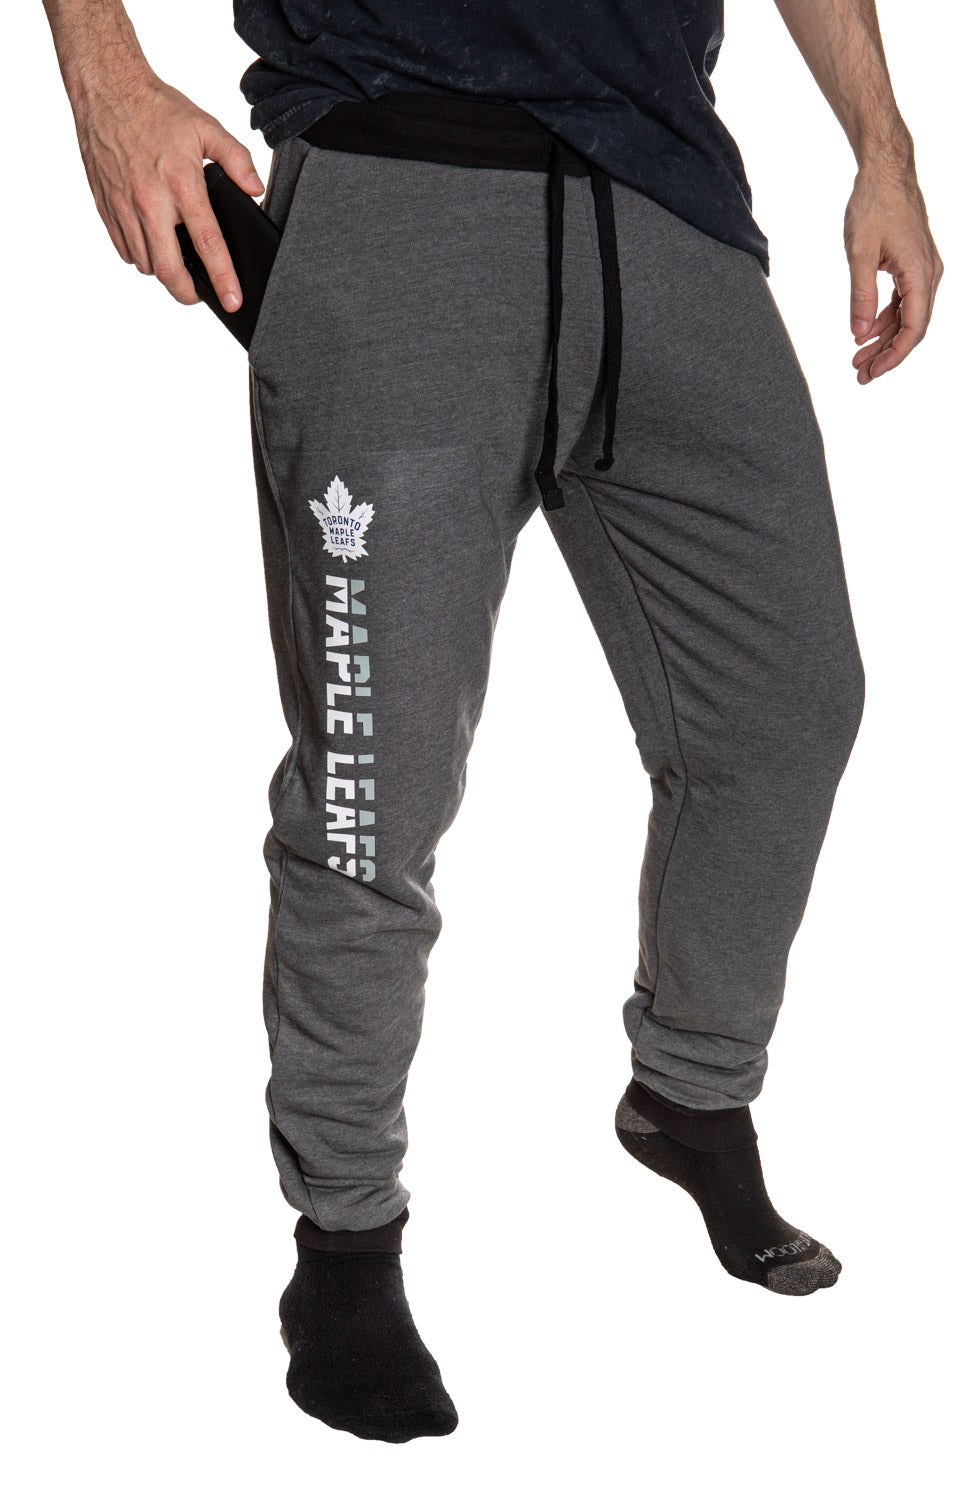 Toronto Maple Leafs NHL Unisex Sherpa Lined Warm Sweatpants with Pockets